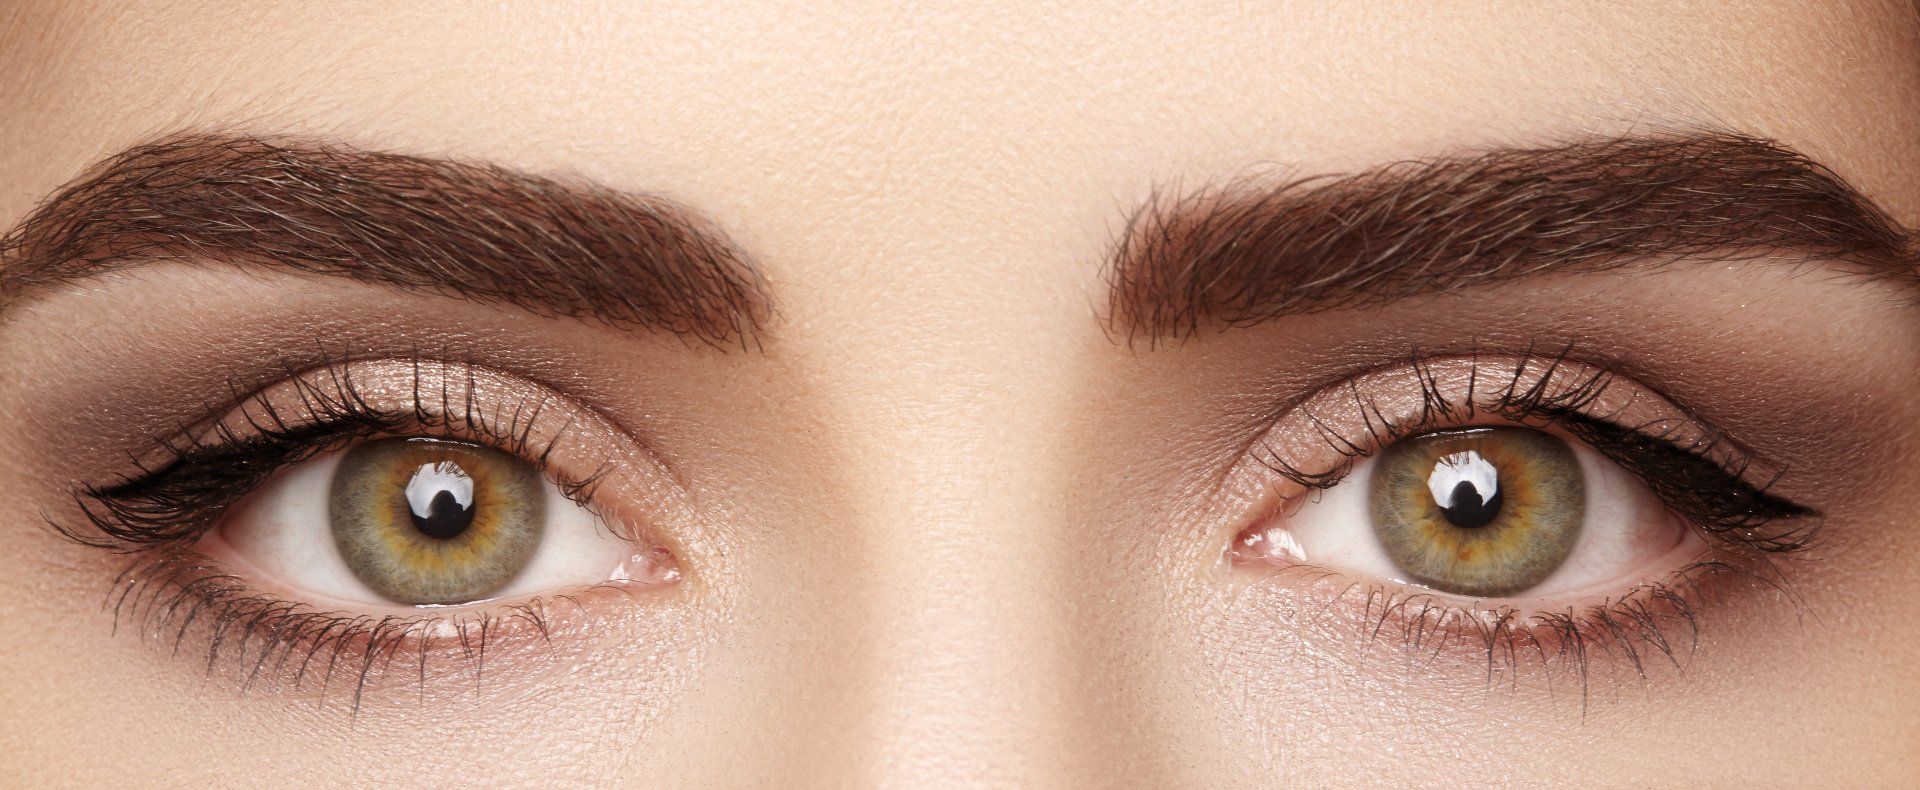 close up of a person's eyes and eyebrows with makeup